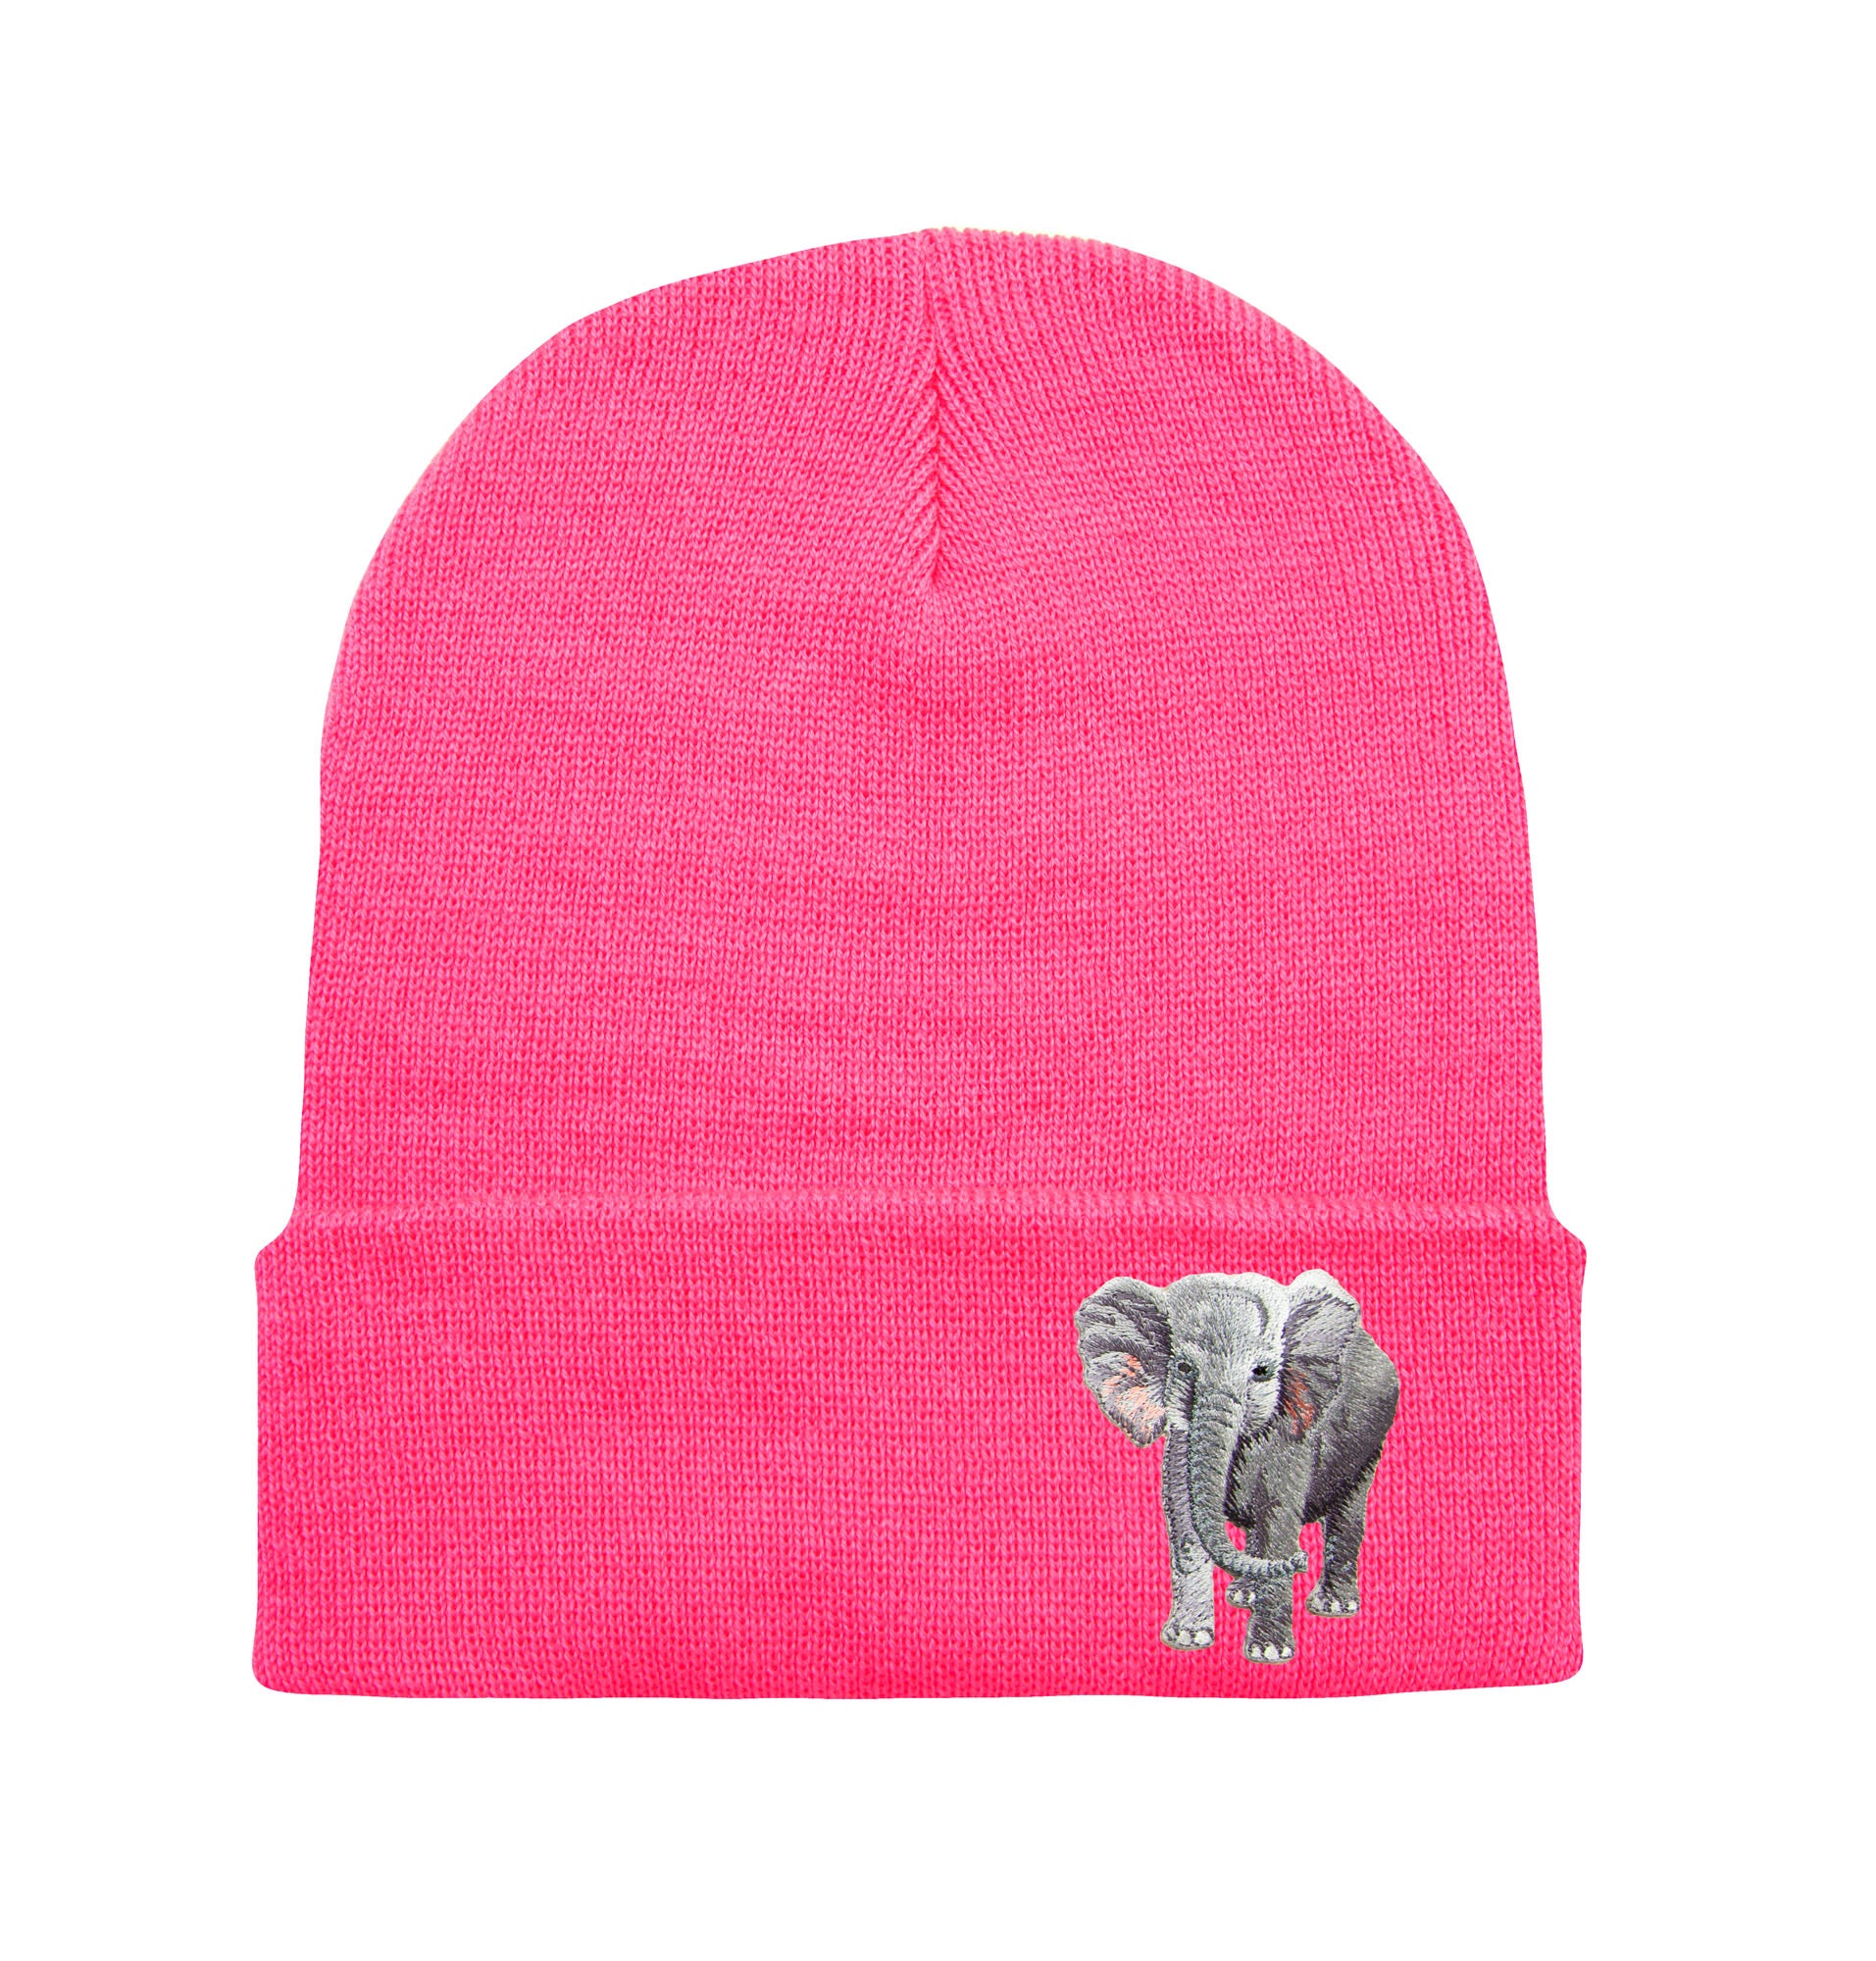 The Hat - Hot Pink